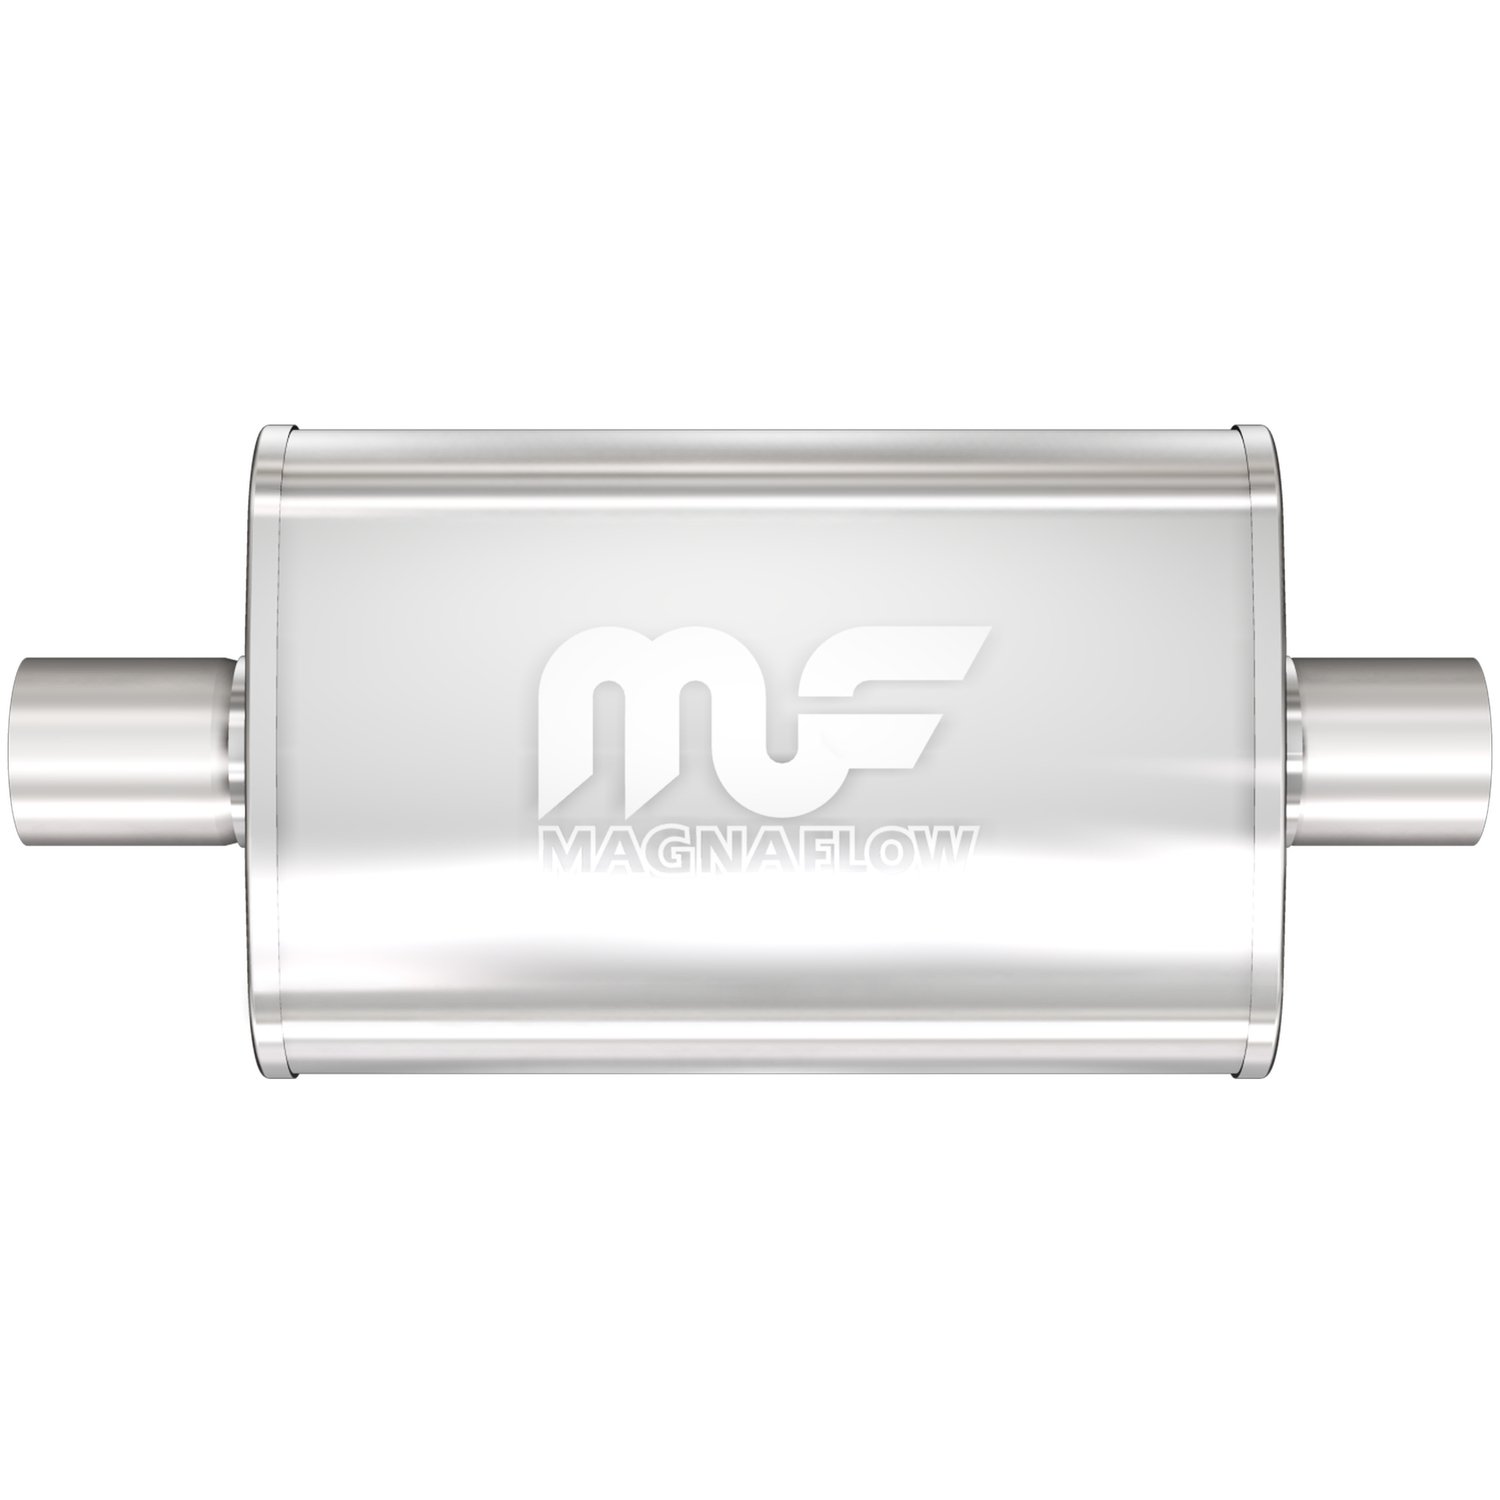 4" x 9" Oval Muffler Center In/Center Out: 2.25"/2.25" Body Length: 14" Overall Length: 20" Core Size: 2.5" Satin Finish